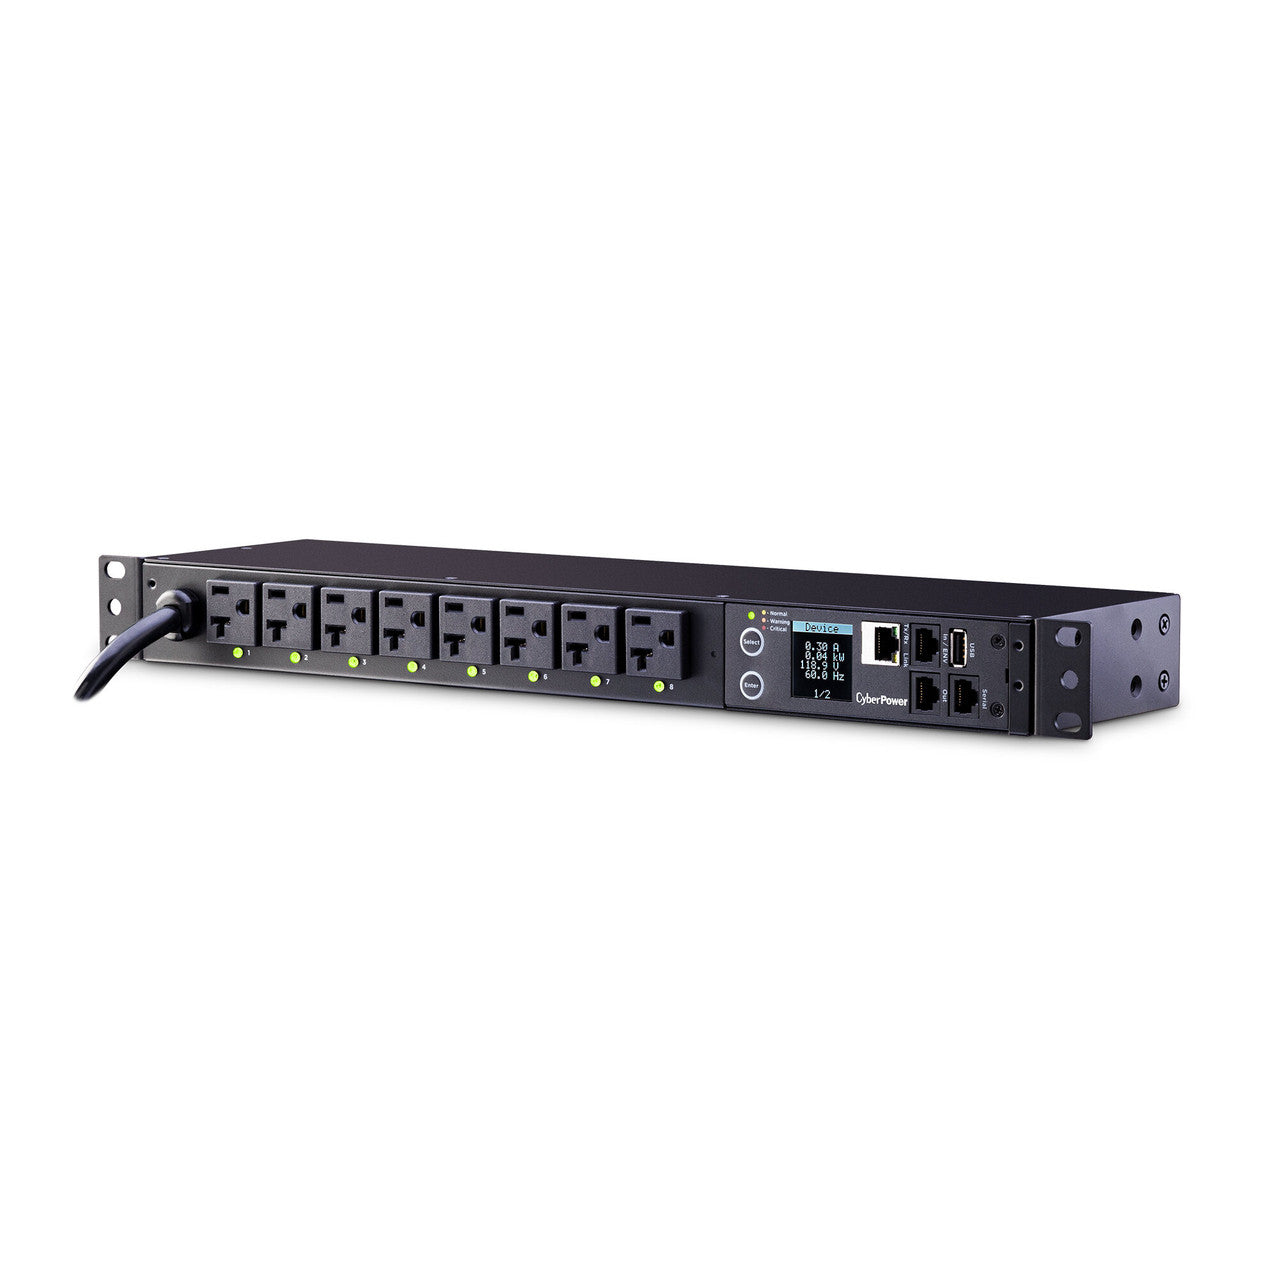 CyberPower PDU81002 SW MBO PDU 20A 120V Metered-by-Outlet Switched PDU 8 NEMA Outlets 12ft cord 3yr Warranty